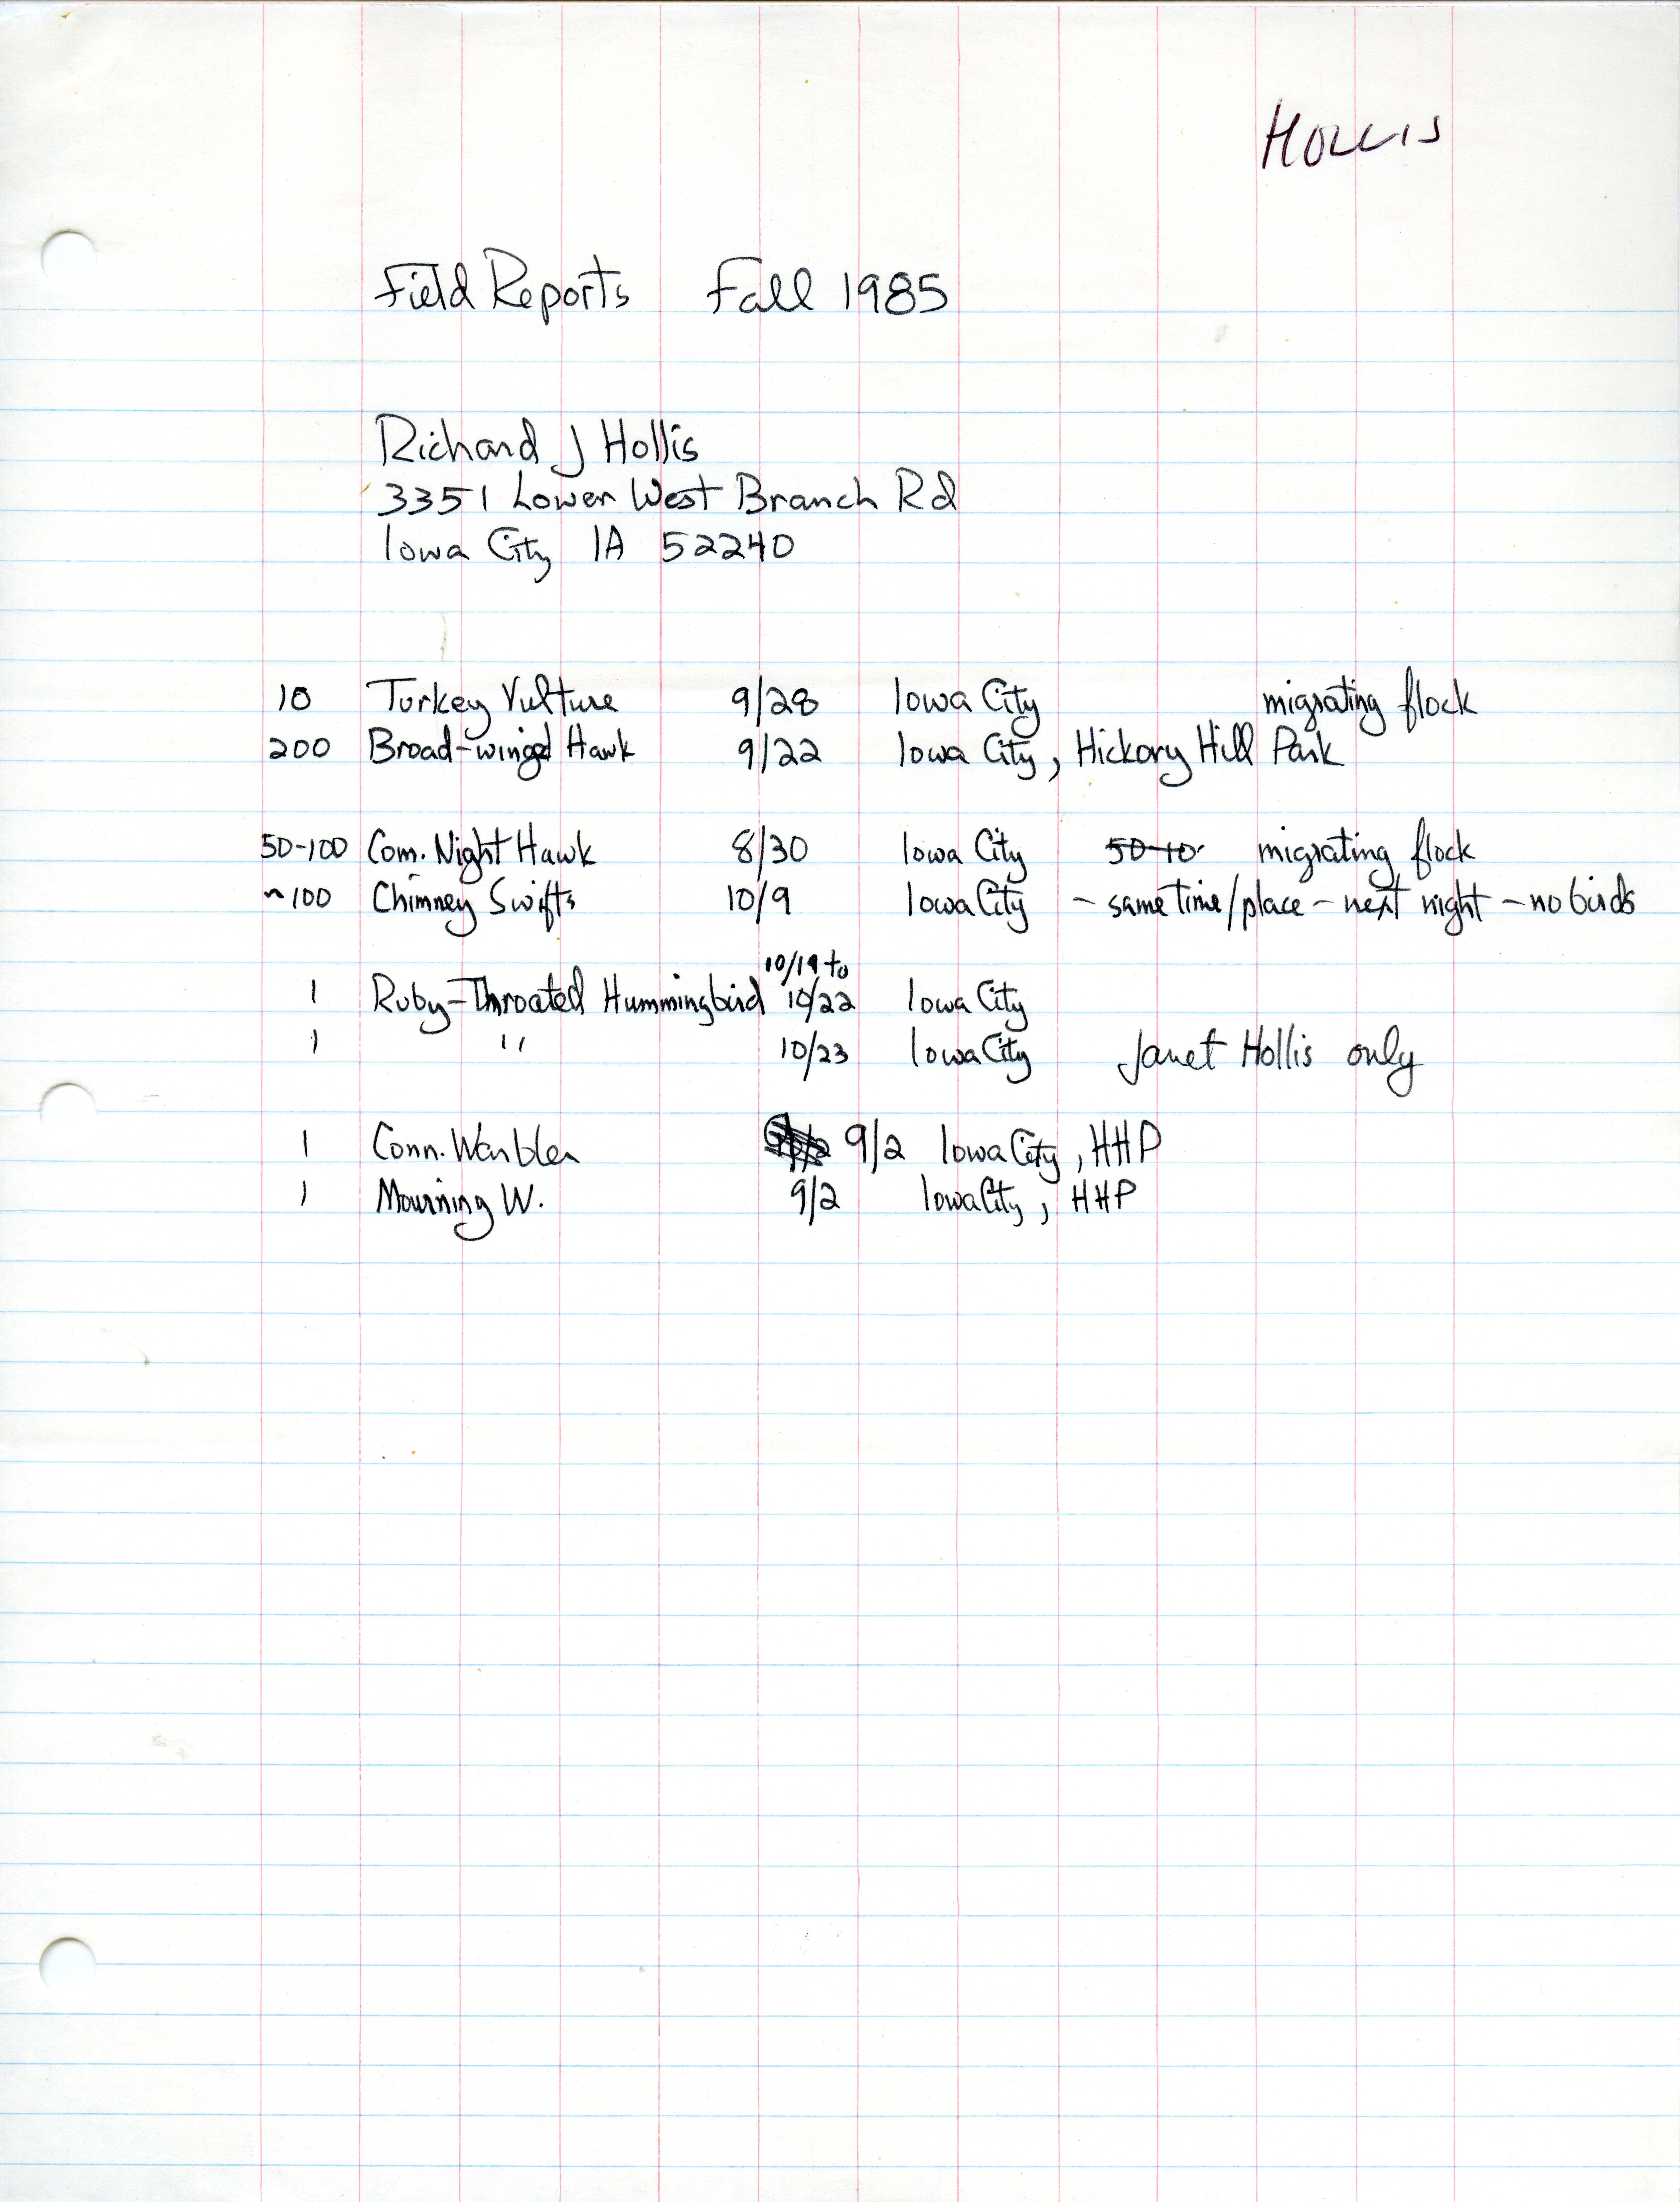 List of birds sighted for Fall 1985 compiled by Richard Hollis